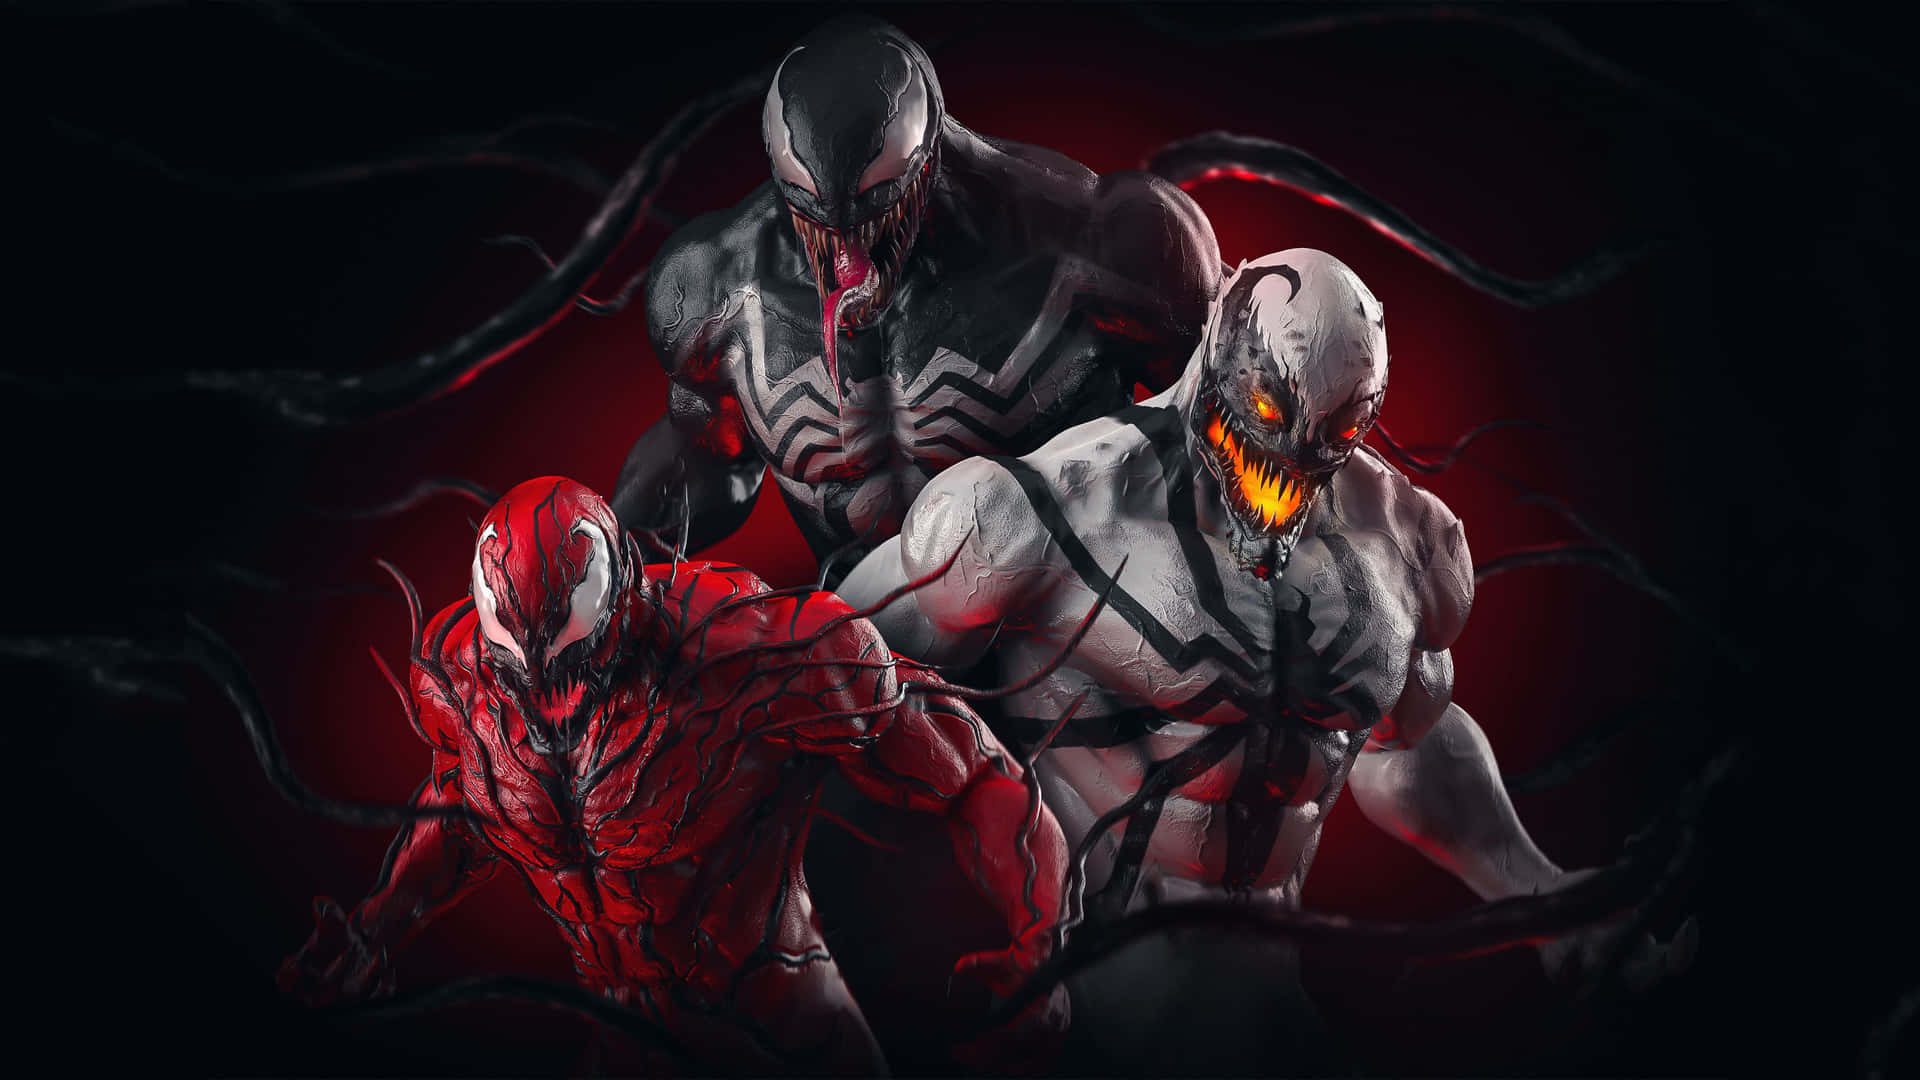 Carnage and Venom Locked in an Epic Battle Wallpaper